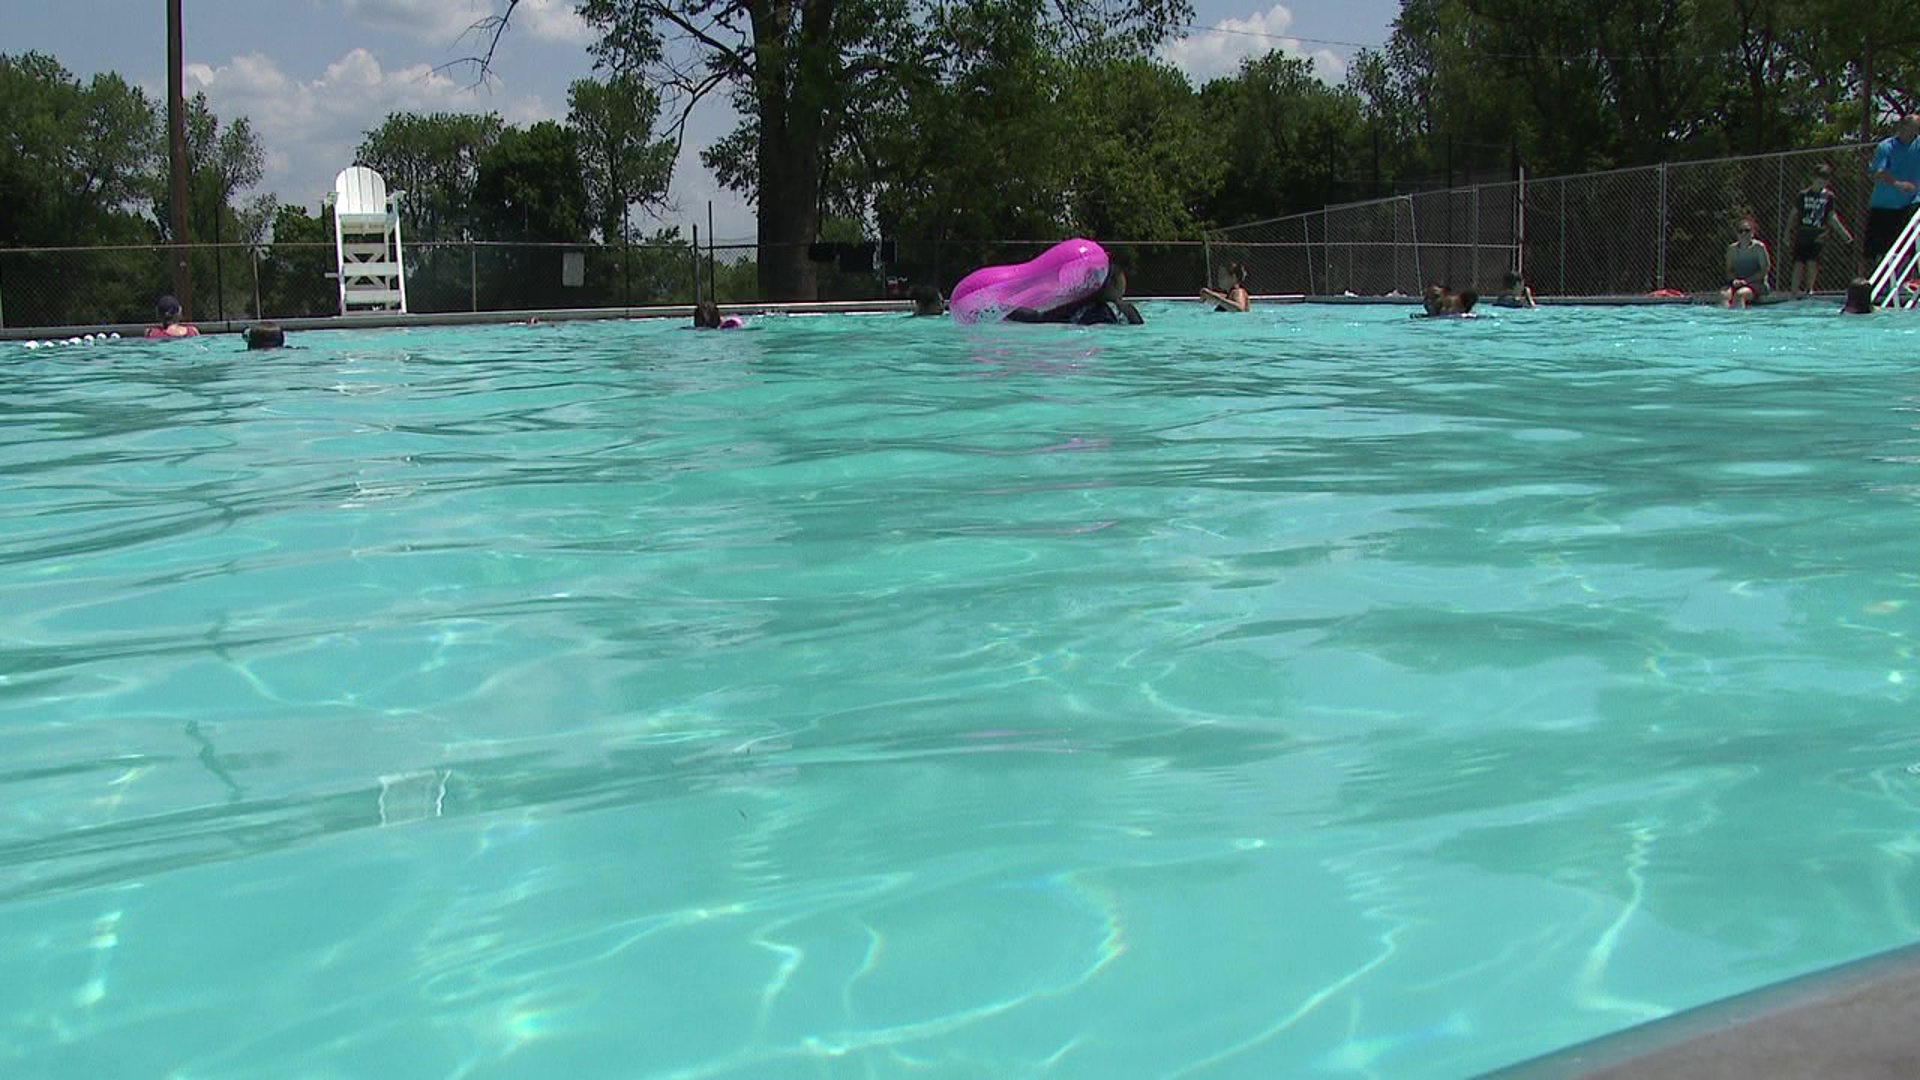 The Weston Park pool was closed all day Thursday for maintenance right in the middle of a heat wave.